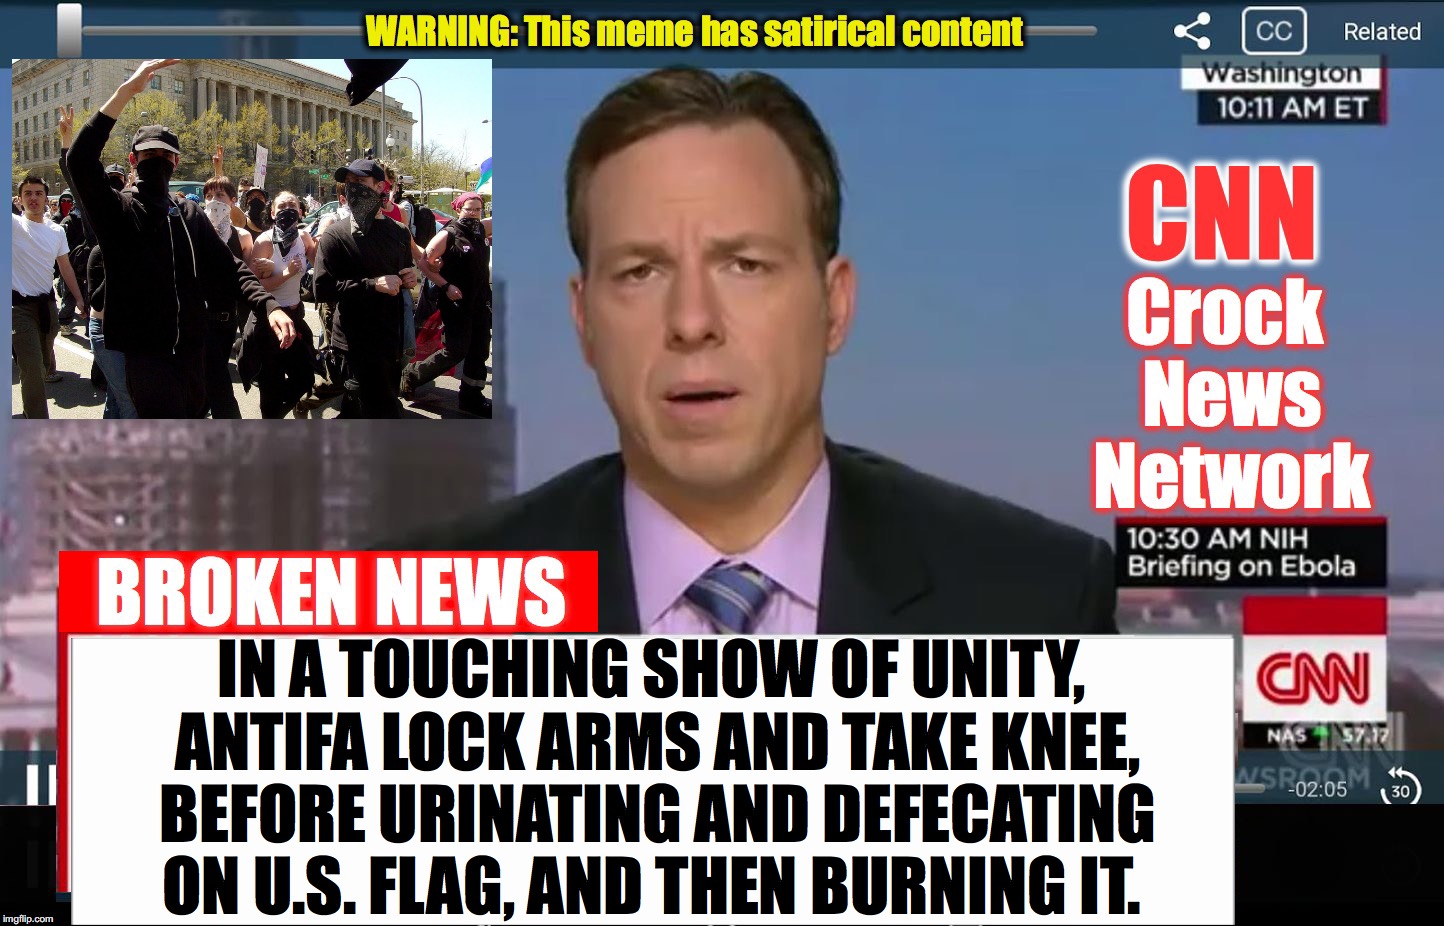 some things just make you feel all warm and fuzzy.... [satire] | IN A TOUCHING SHOW OF UNITY, ANTIFA LOCK ARMS AND TAKE KNEE, BEFORE URINATING AND DEFECATING ON U.S. FLAG, AND THEN BURNING IT. | image tagged in cnn crock news network | made w/ Imgflip meme maker